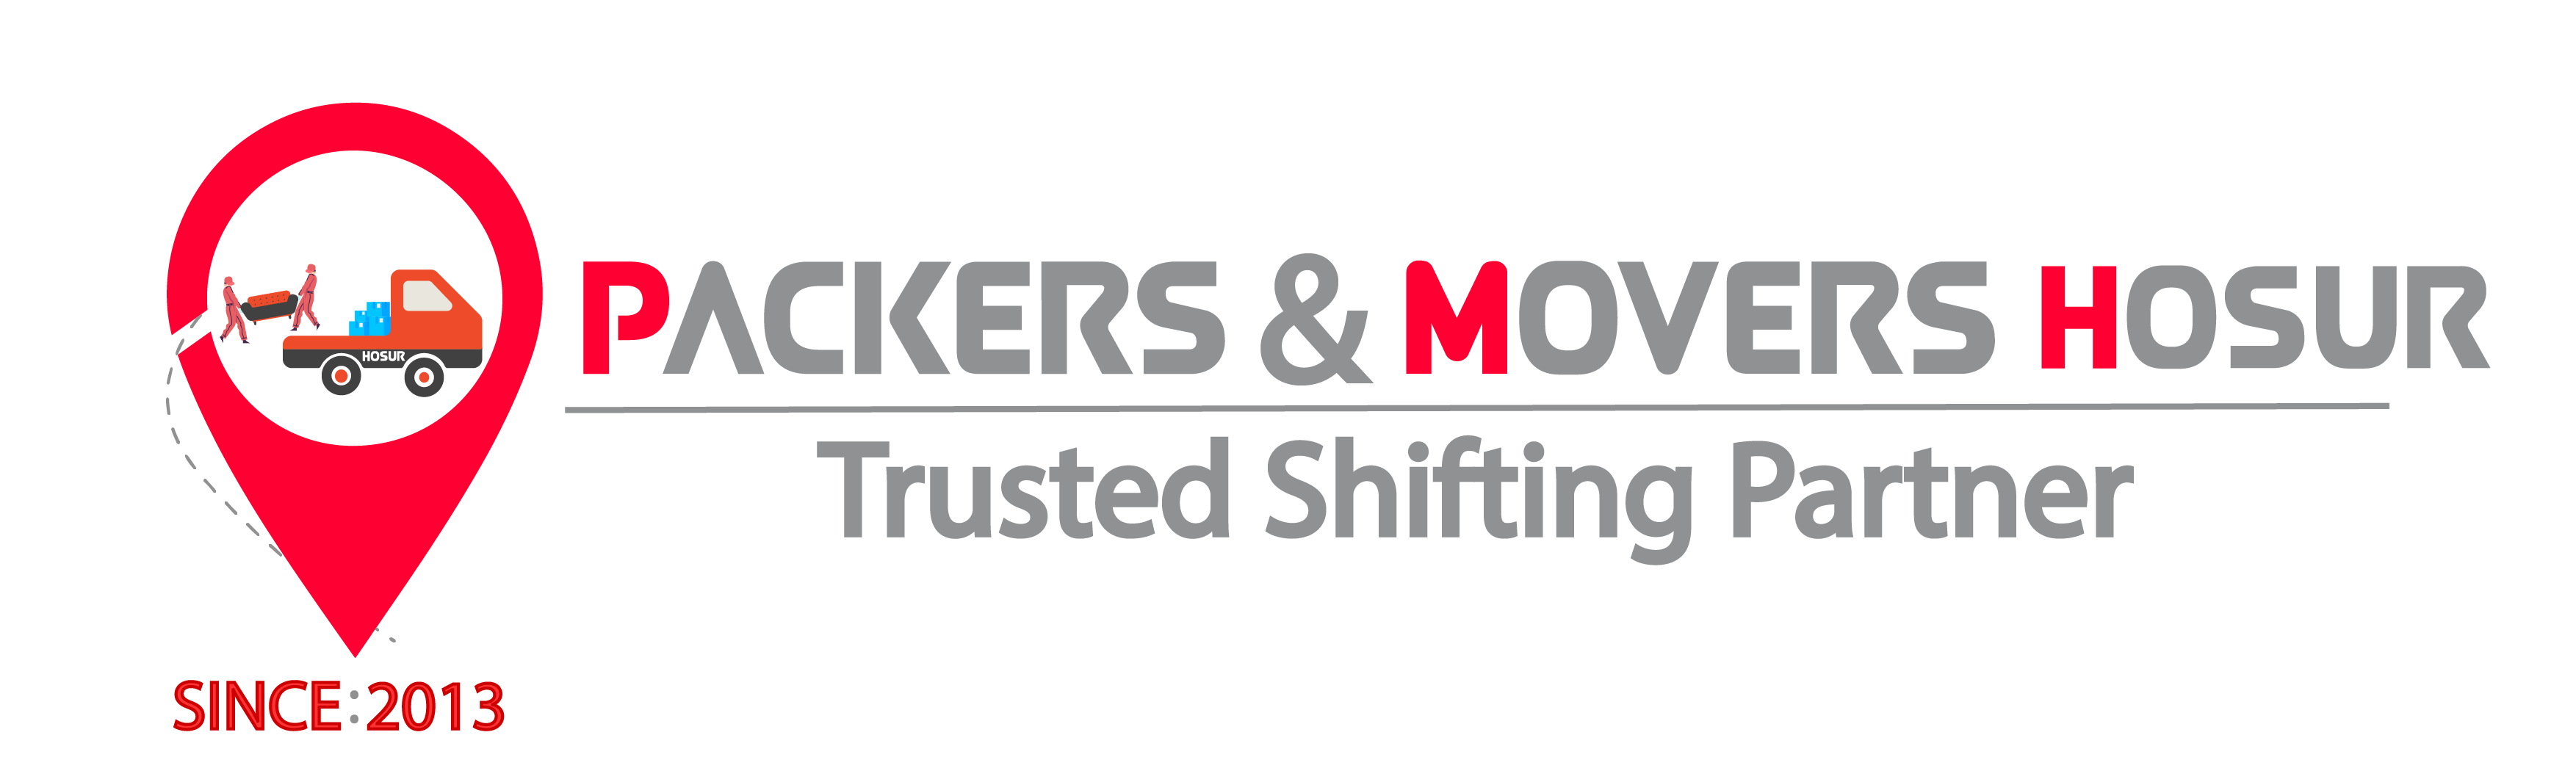 packers and movers hosur logo